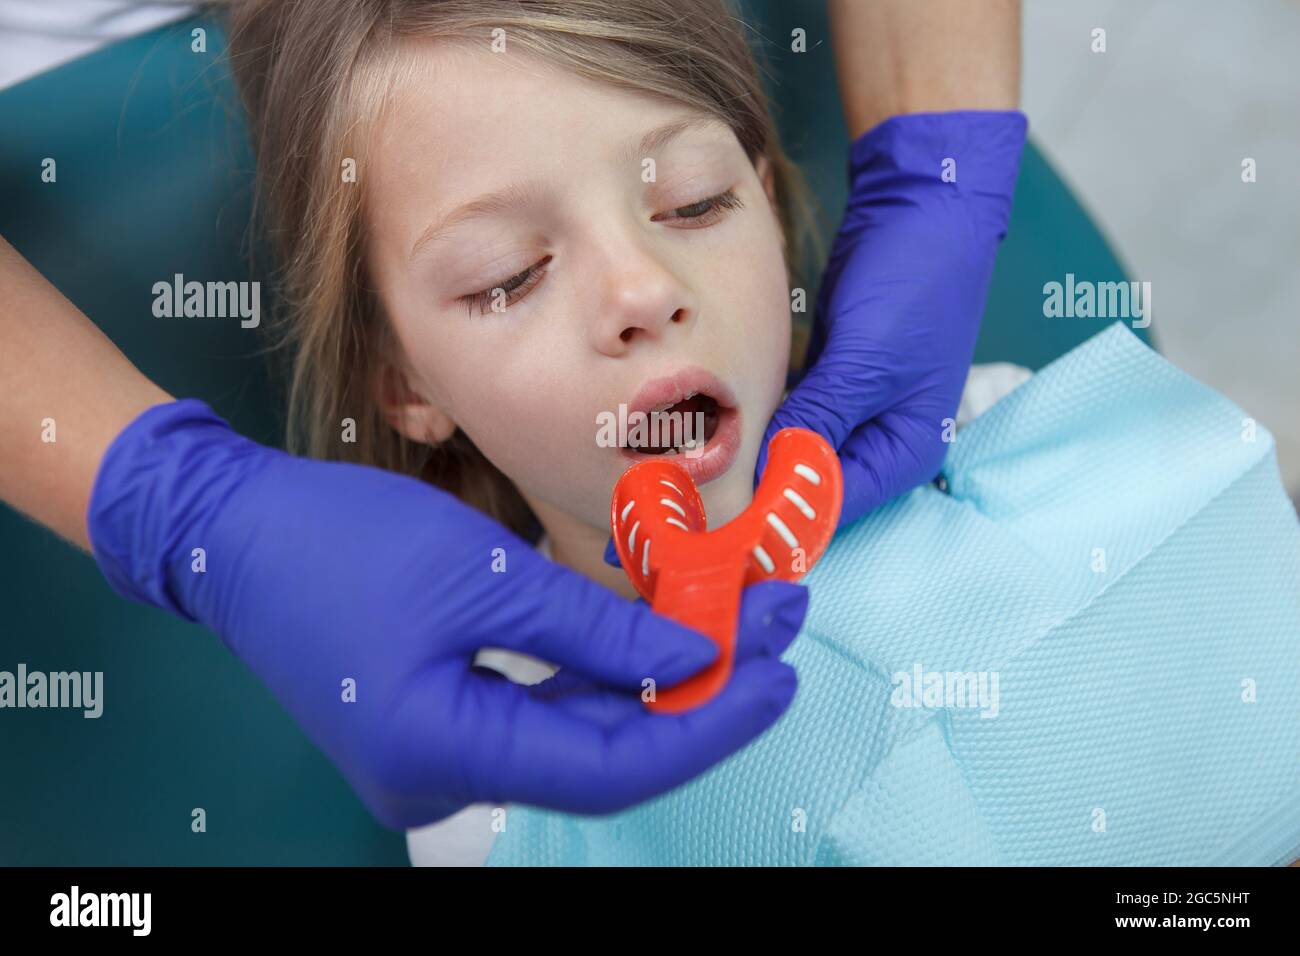 Dentist making teeth impressions of a child patient, using dental putty Stock Photo